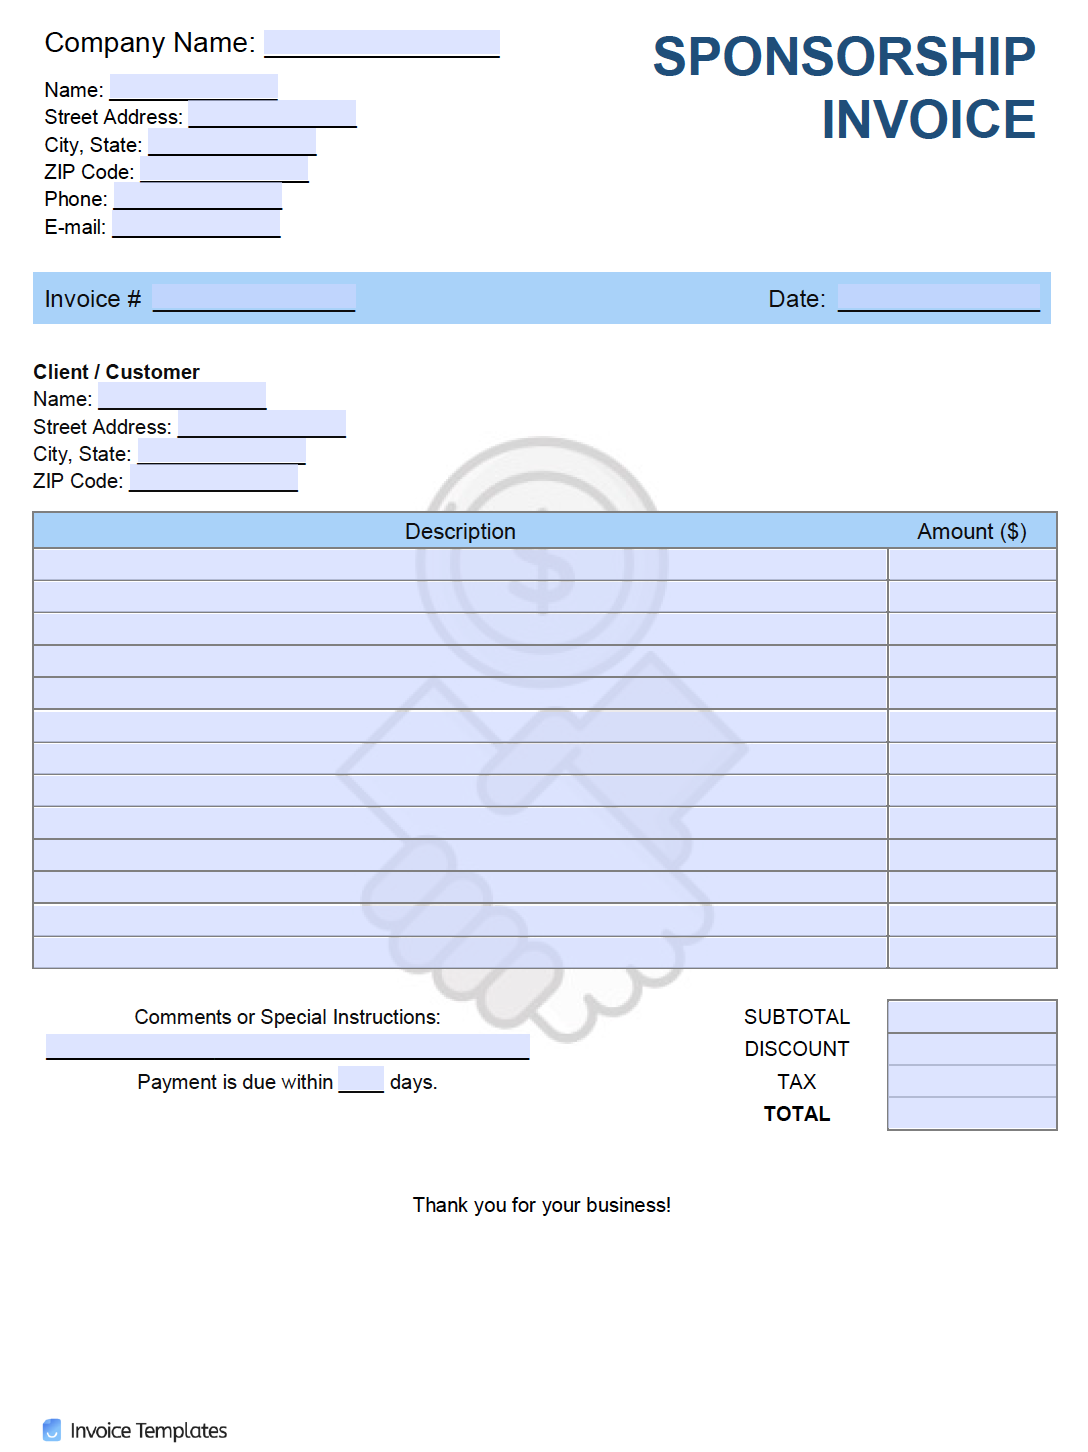 Free Sponsorship Invoice Template  PDF  WORD  EXCEL With Regard To Blank Sponsorship Form Template